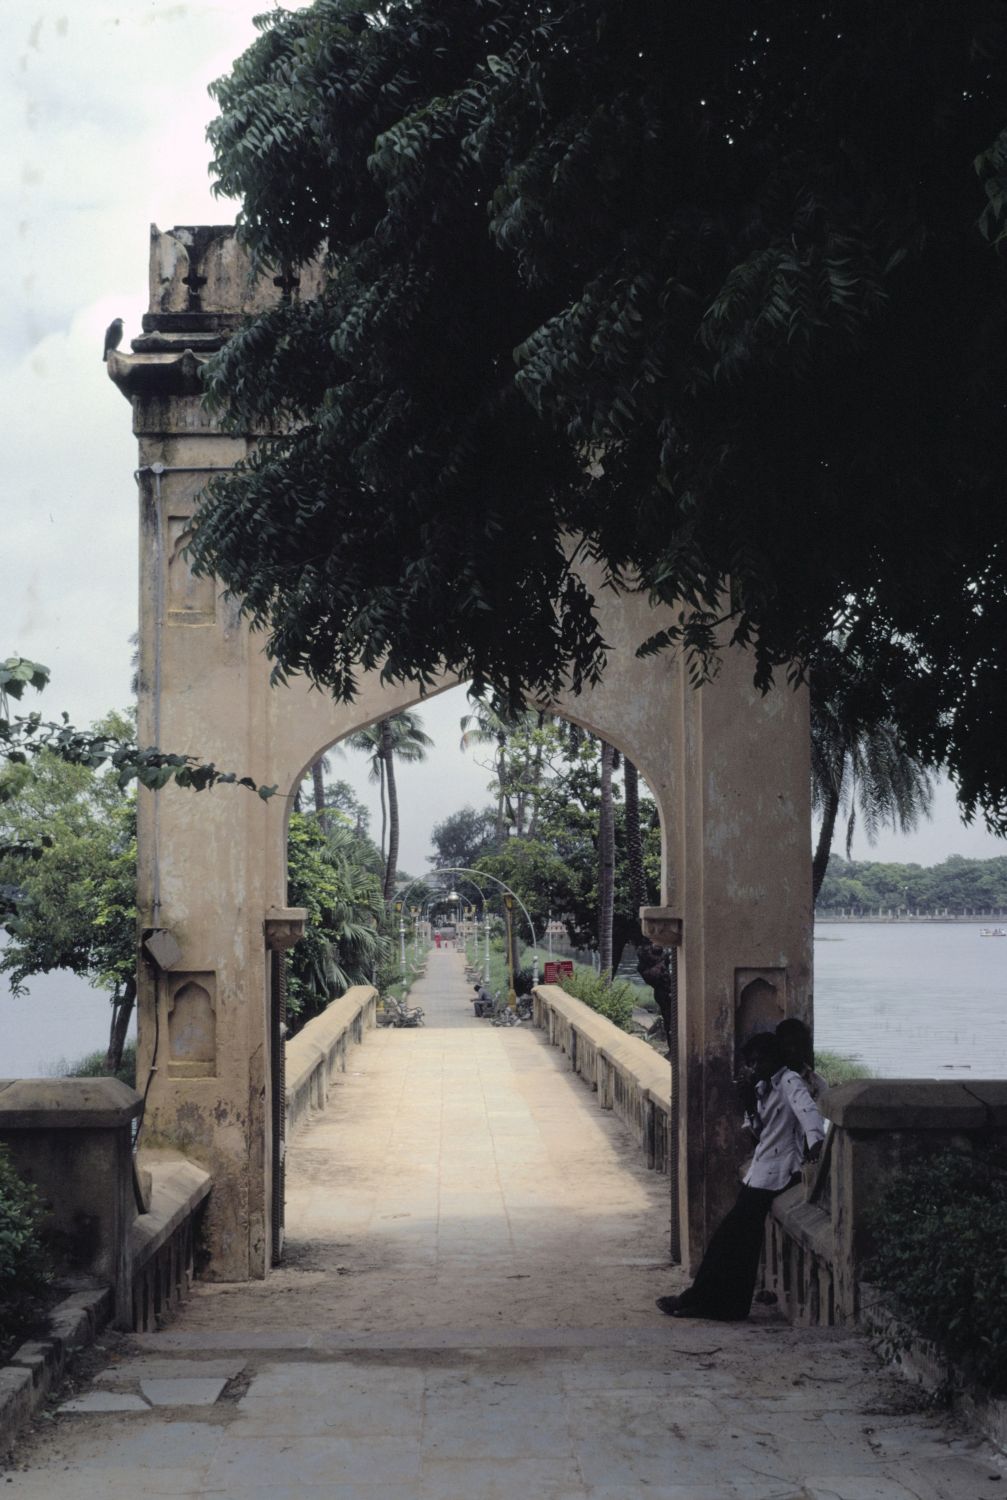 View of entrance to causeway.